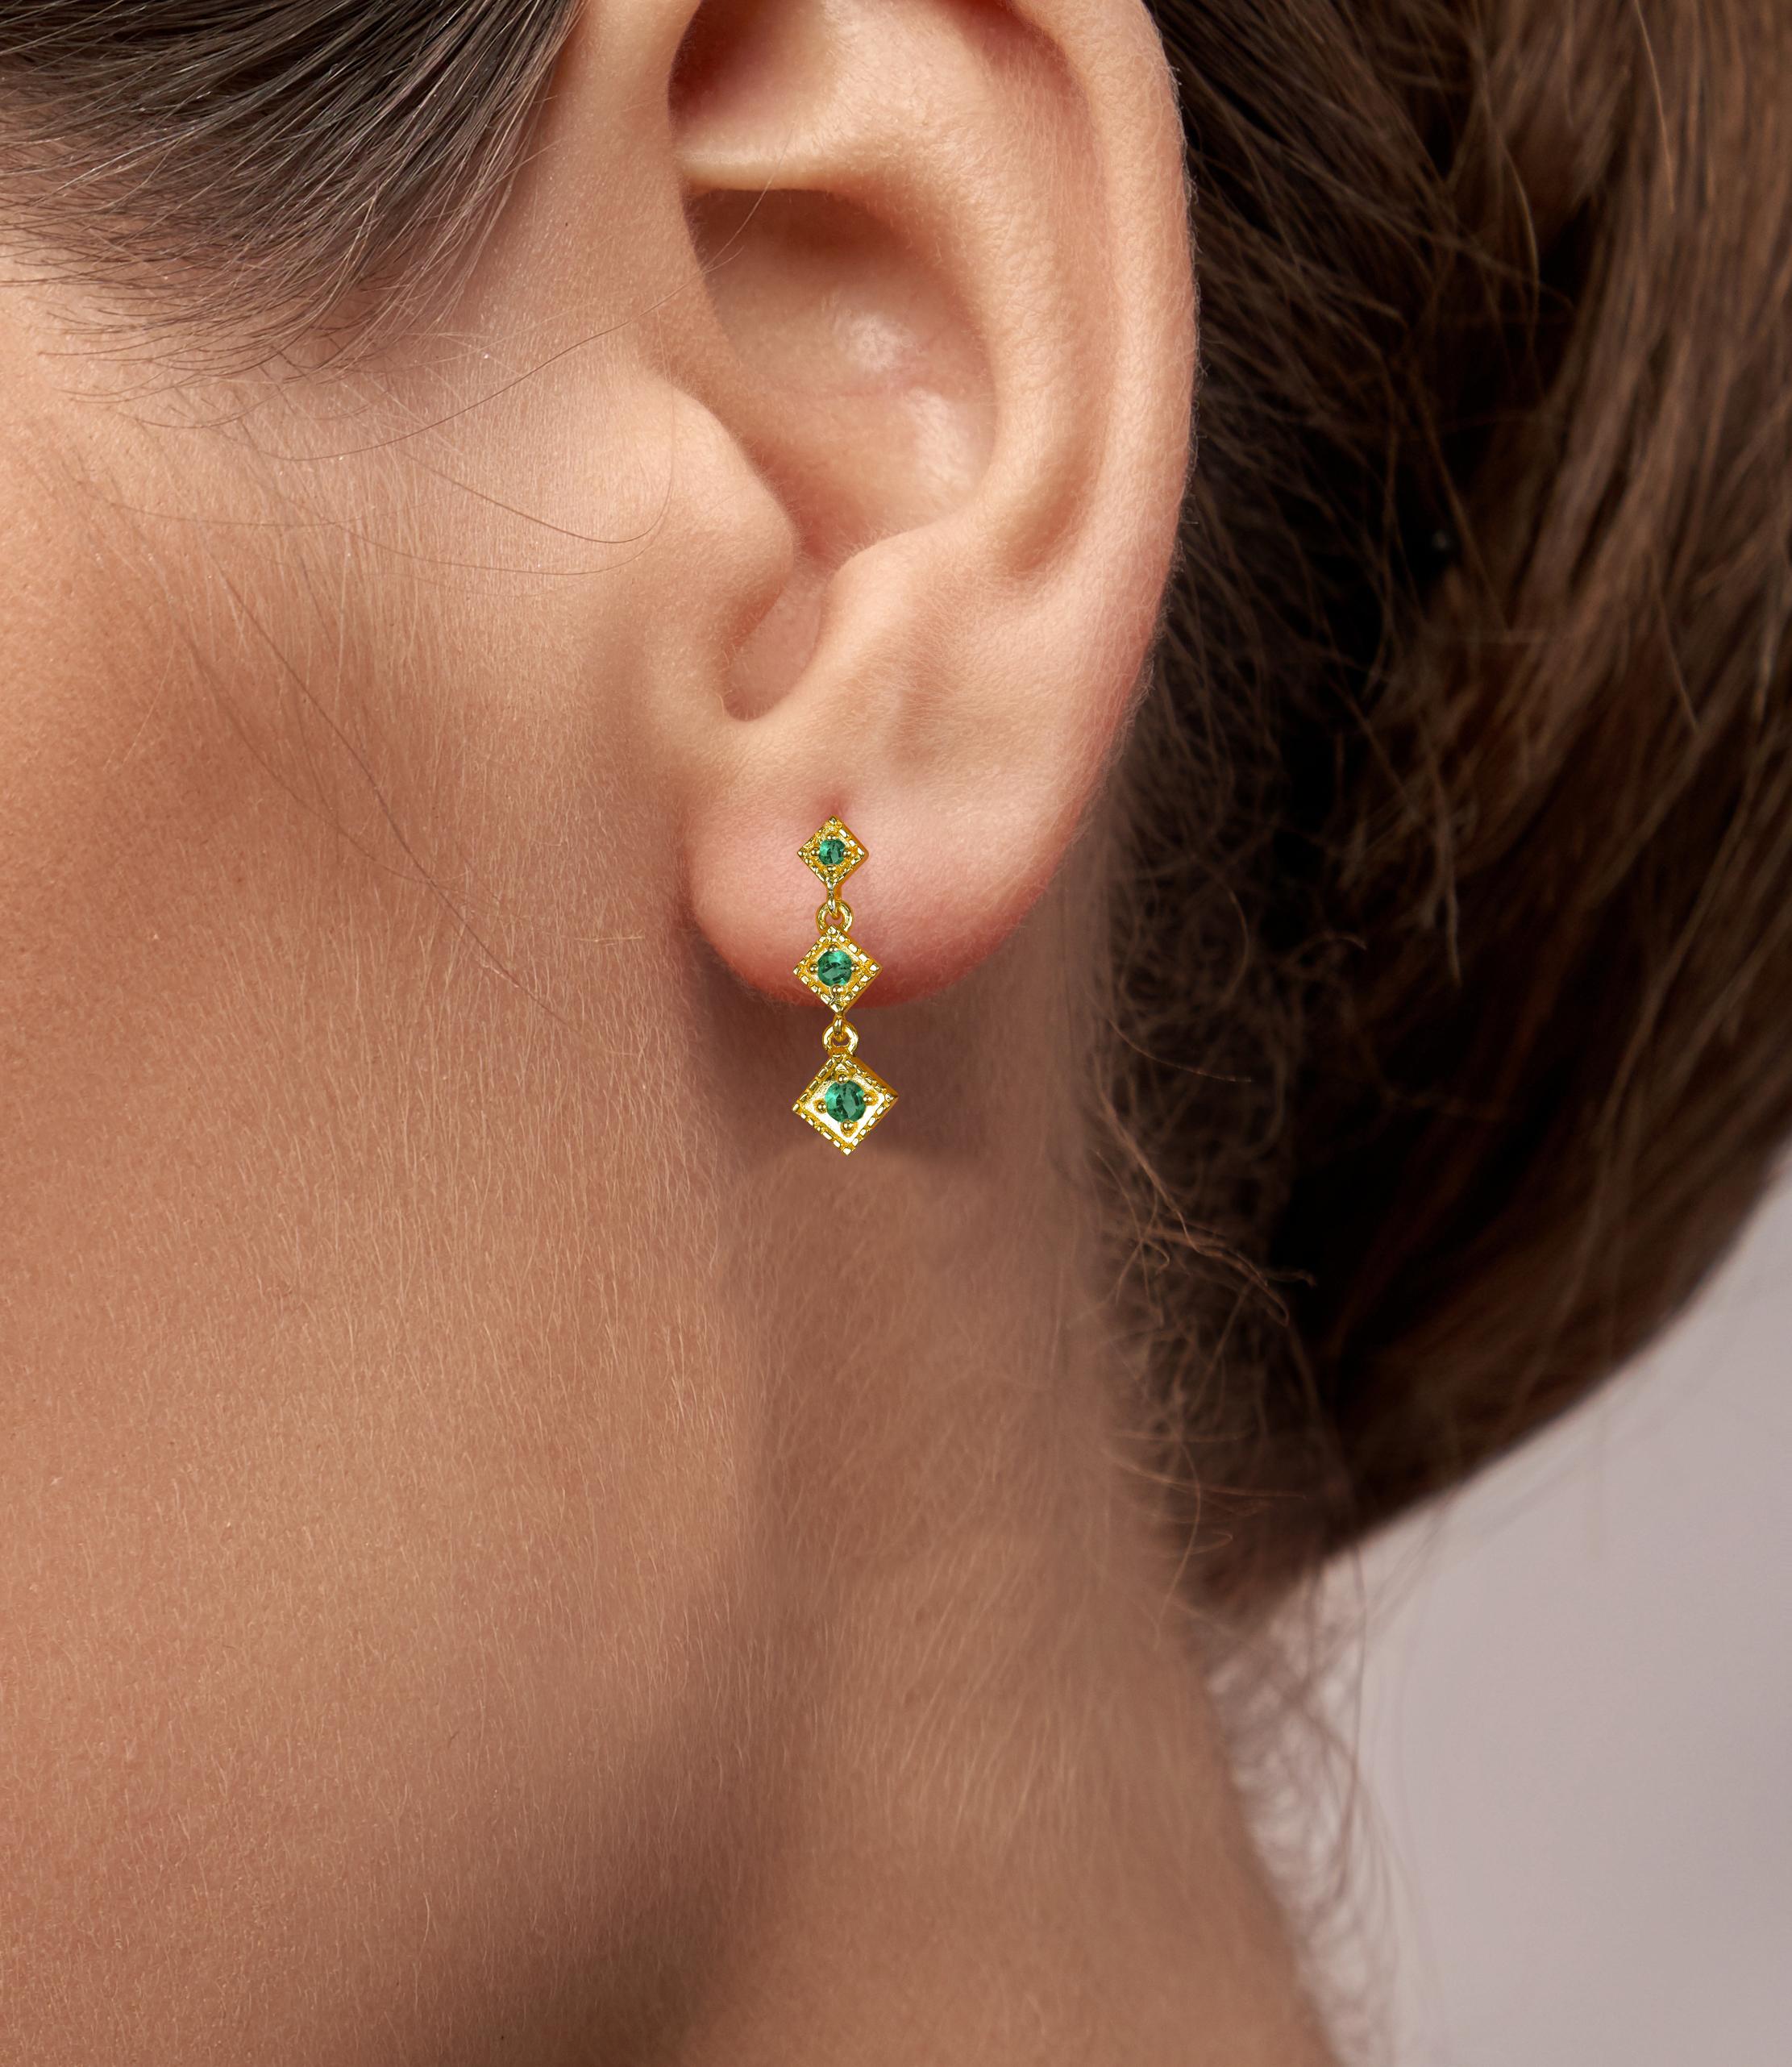 0.09 Ct Stone Emerald, Ruby and Sapphire Studs Earrings in 14K Gold For Sale 3